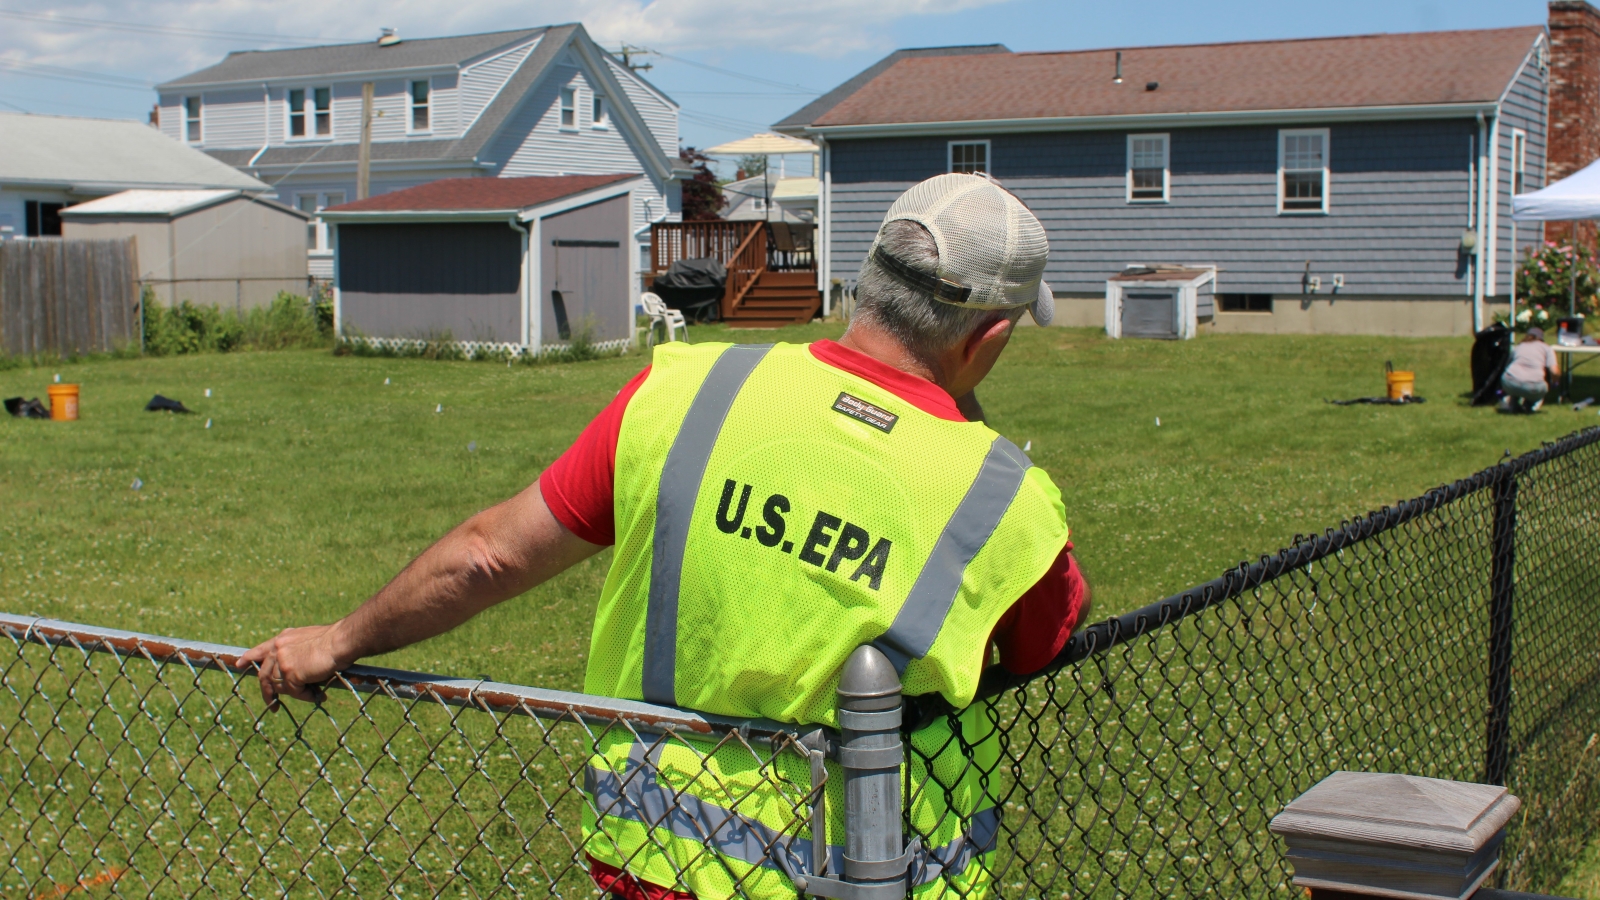 EPA crews began remediation work in the backyard of a single-family home in Dartmouth on Monday.